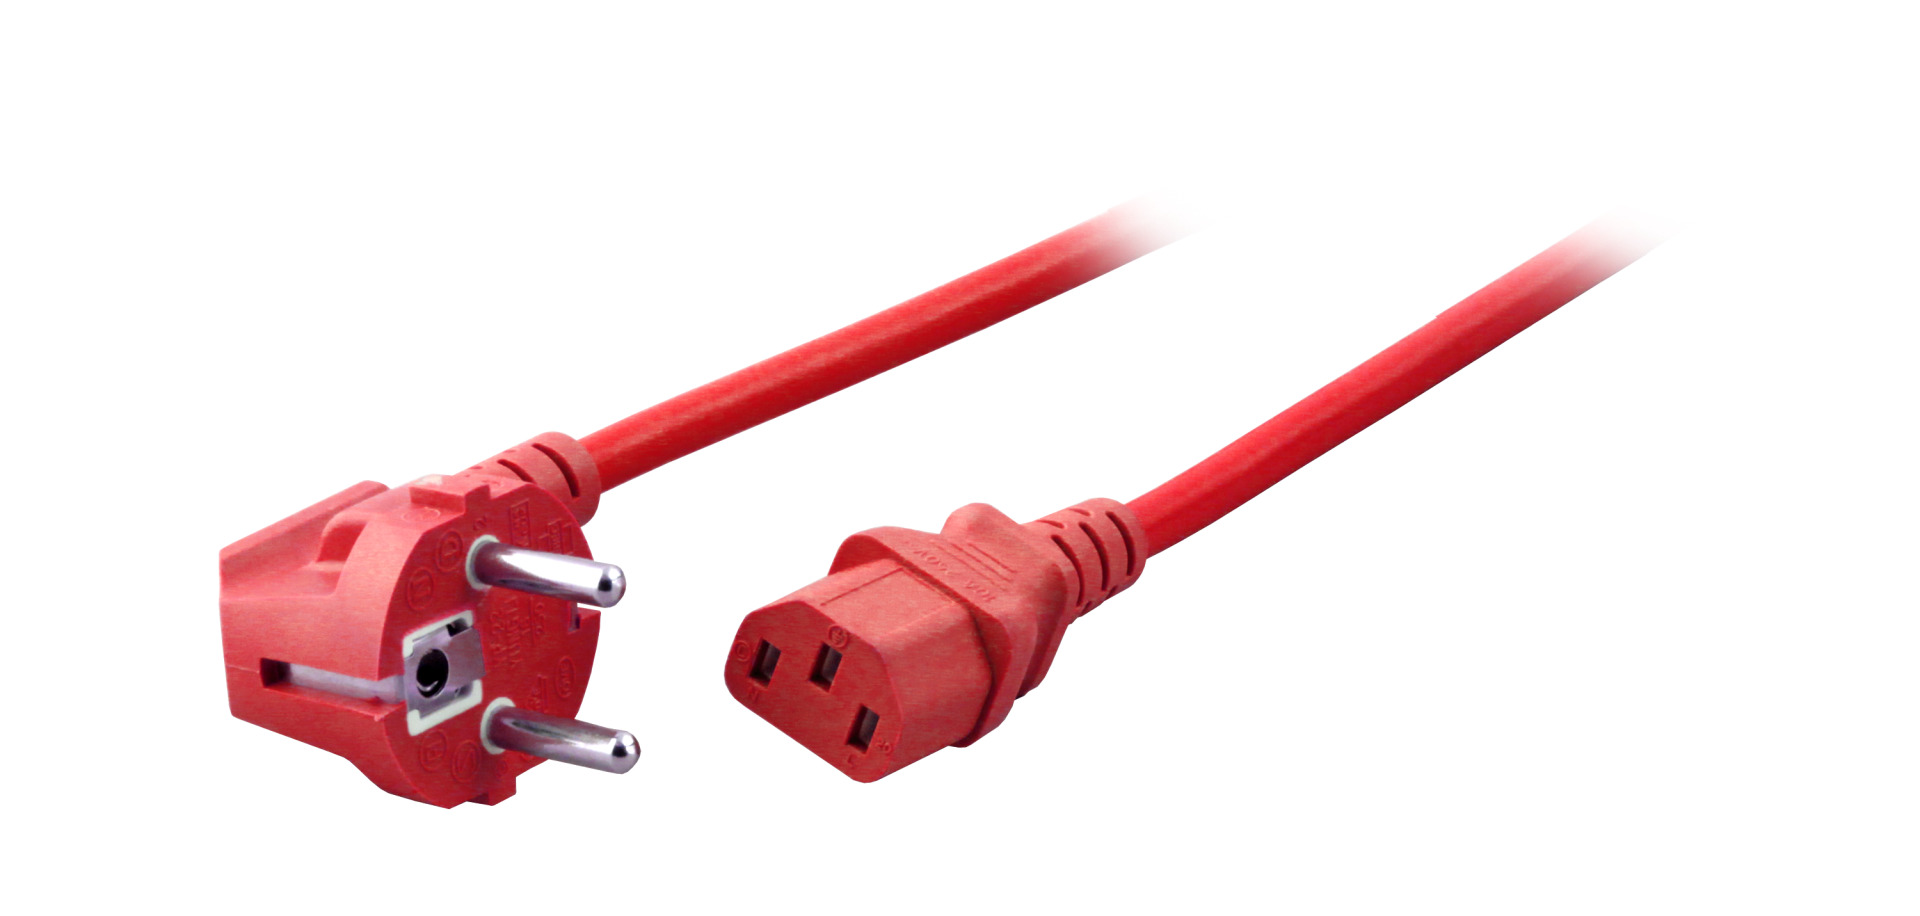 Power Cable CEE7/7 90° - C13 180°, Red, 1.8 m, 3 x 0.75 mm²